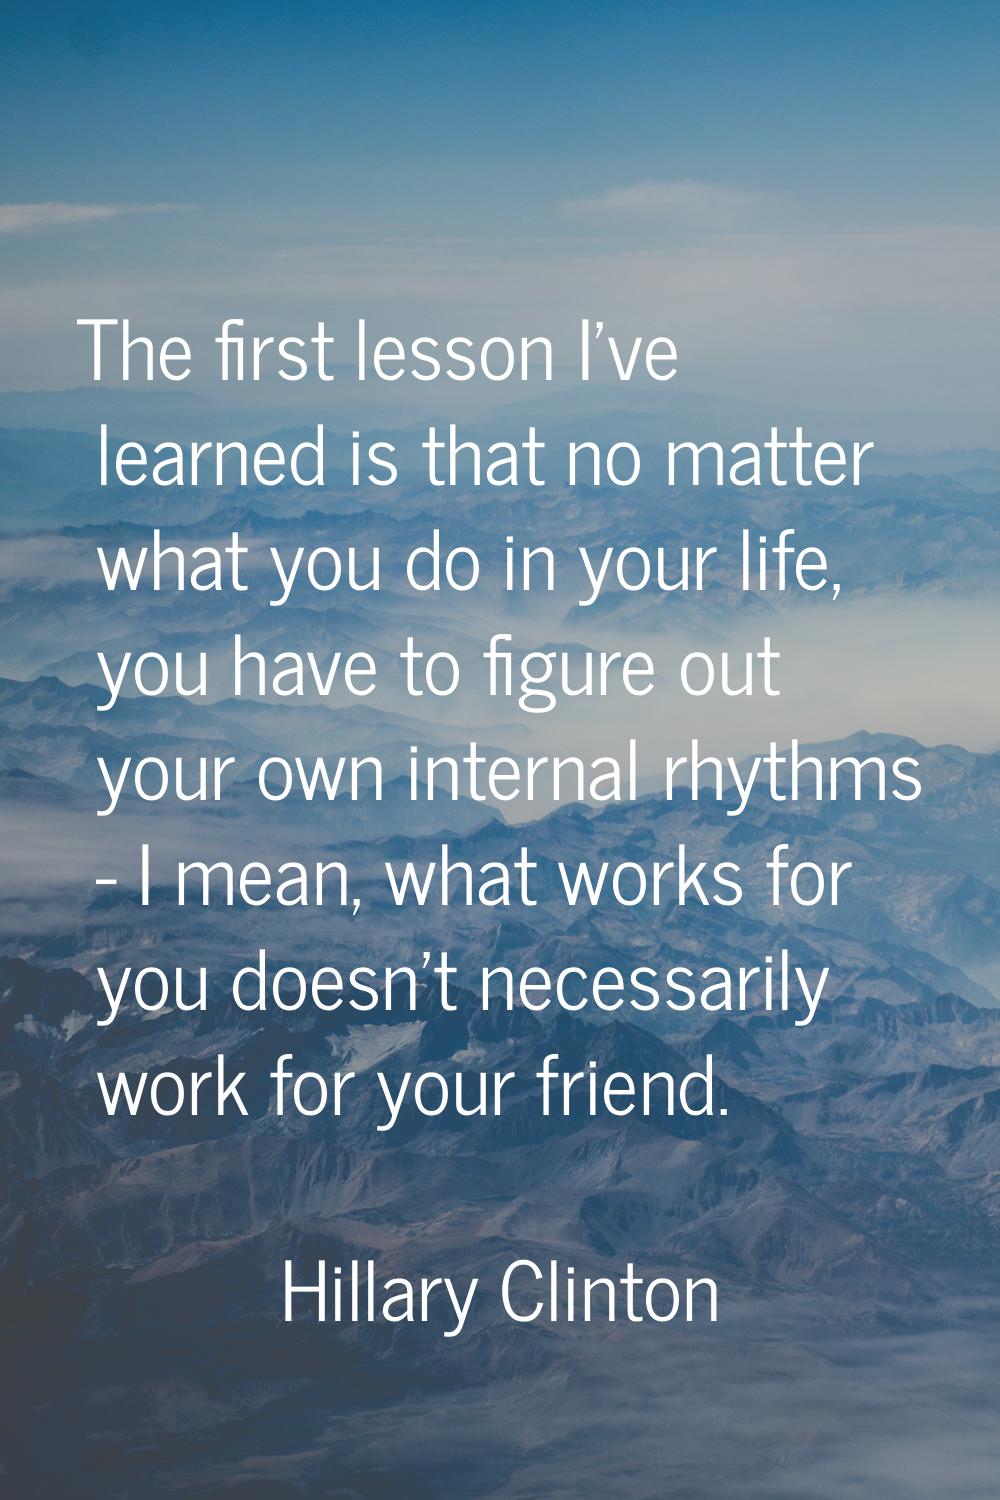 The first lesson I've learned is that no matter what you do in your life, you have to figure out yo